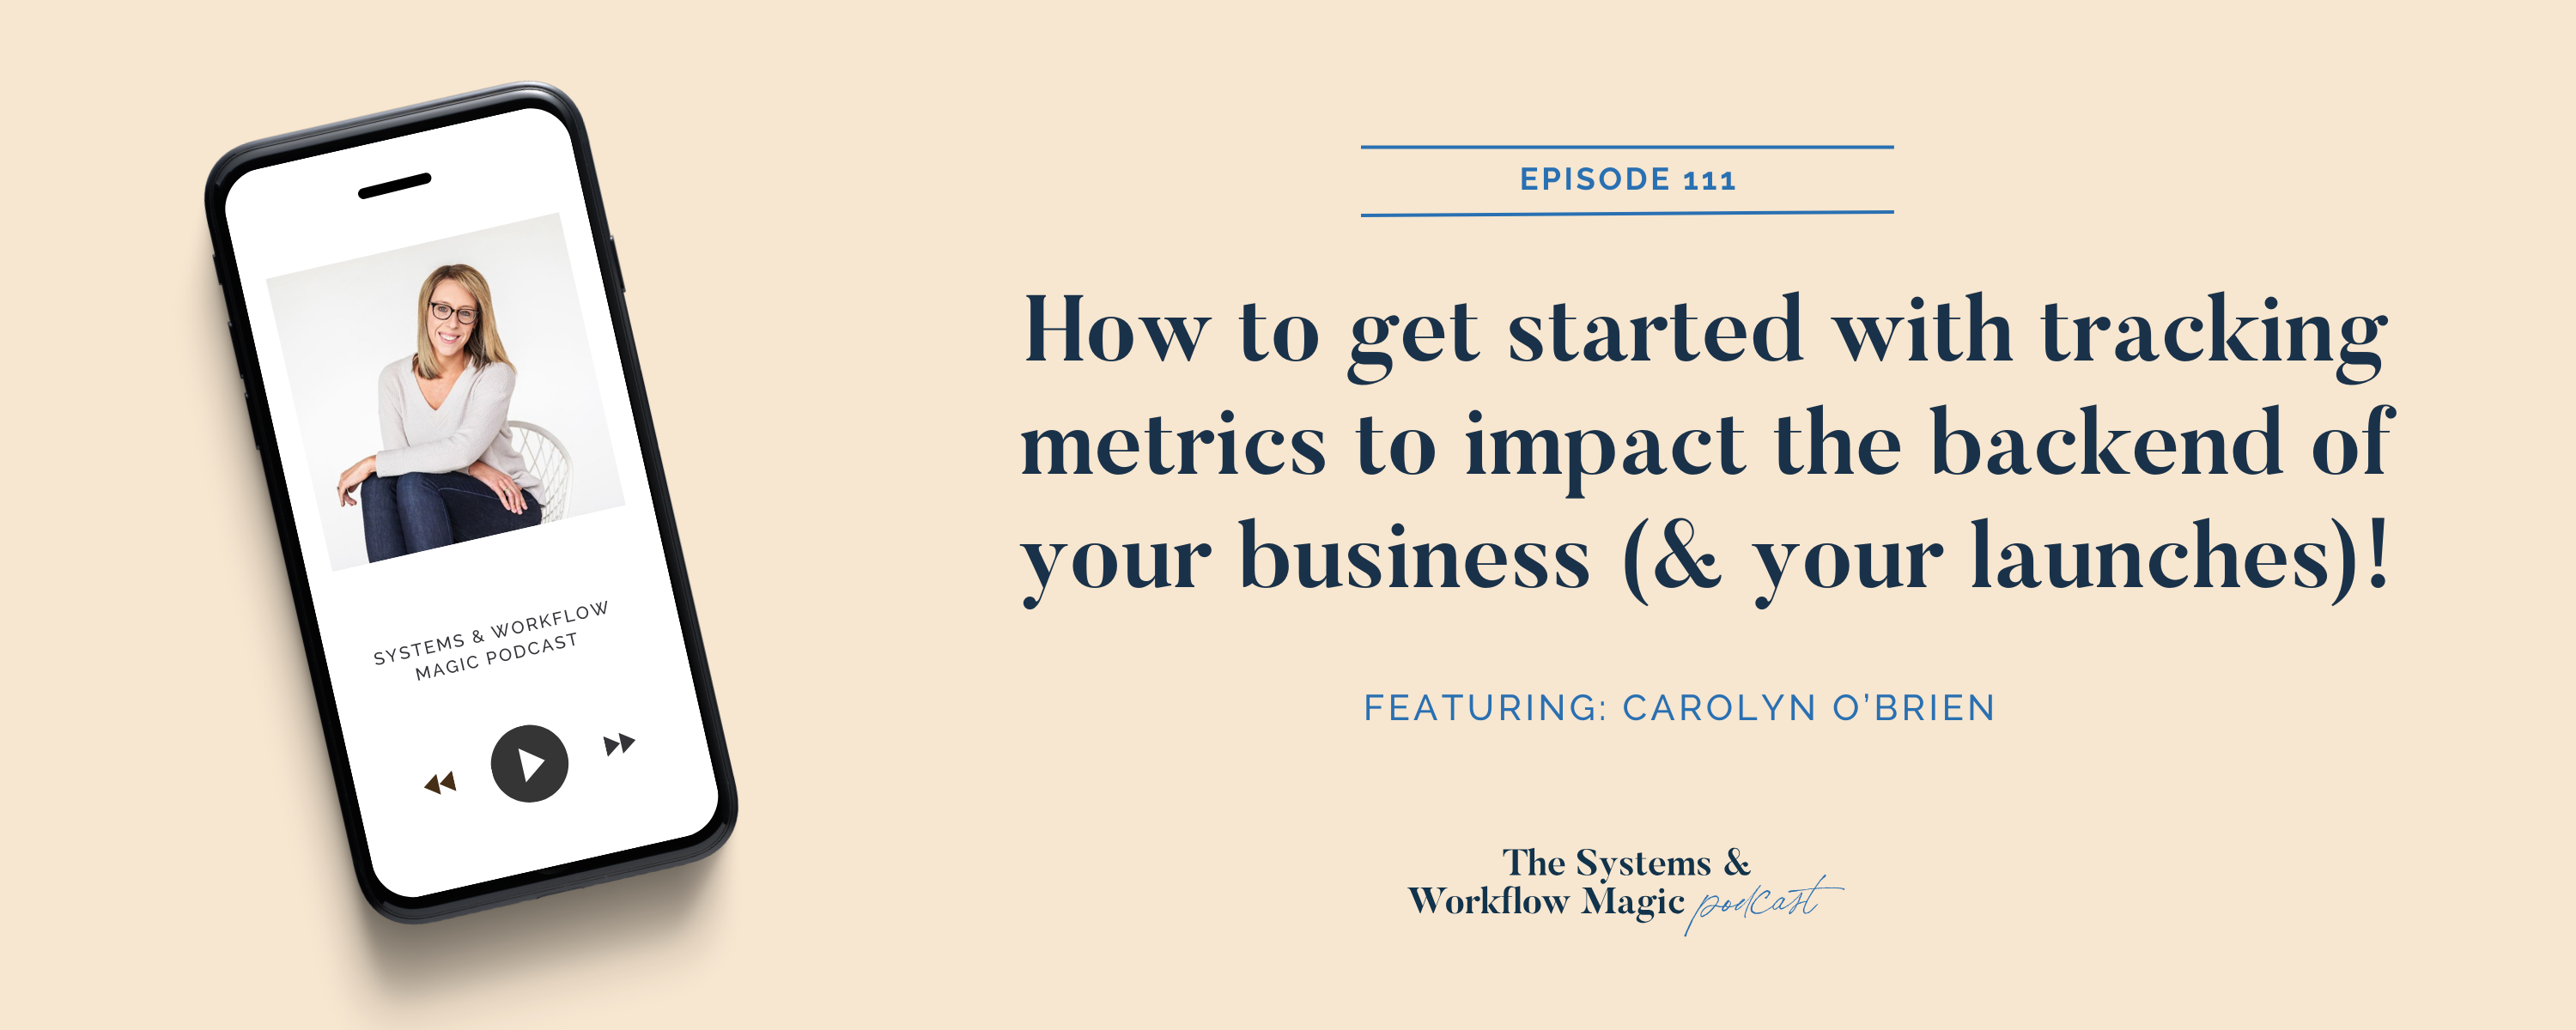 Episode_111_banner_for_the_systems_and_workflow_magic_podcast_featuring_carolyn_obrien